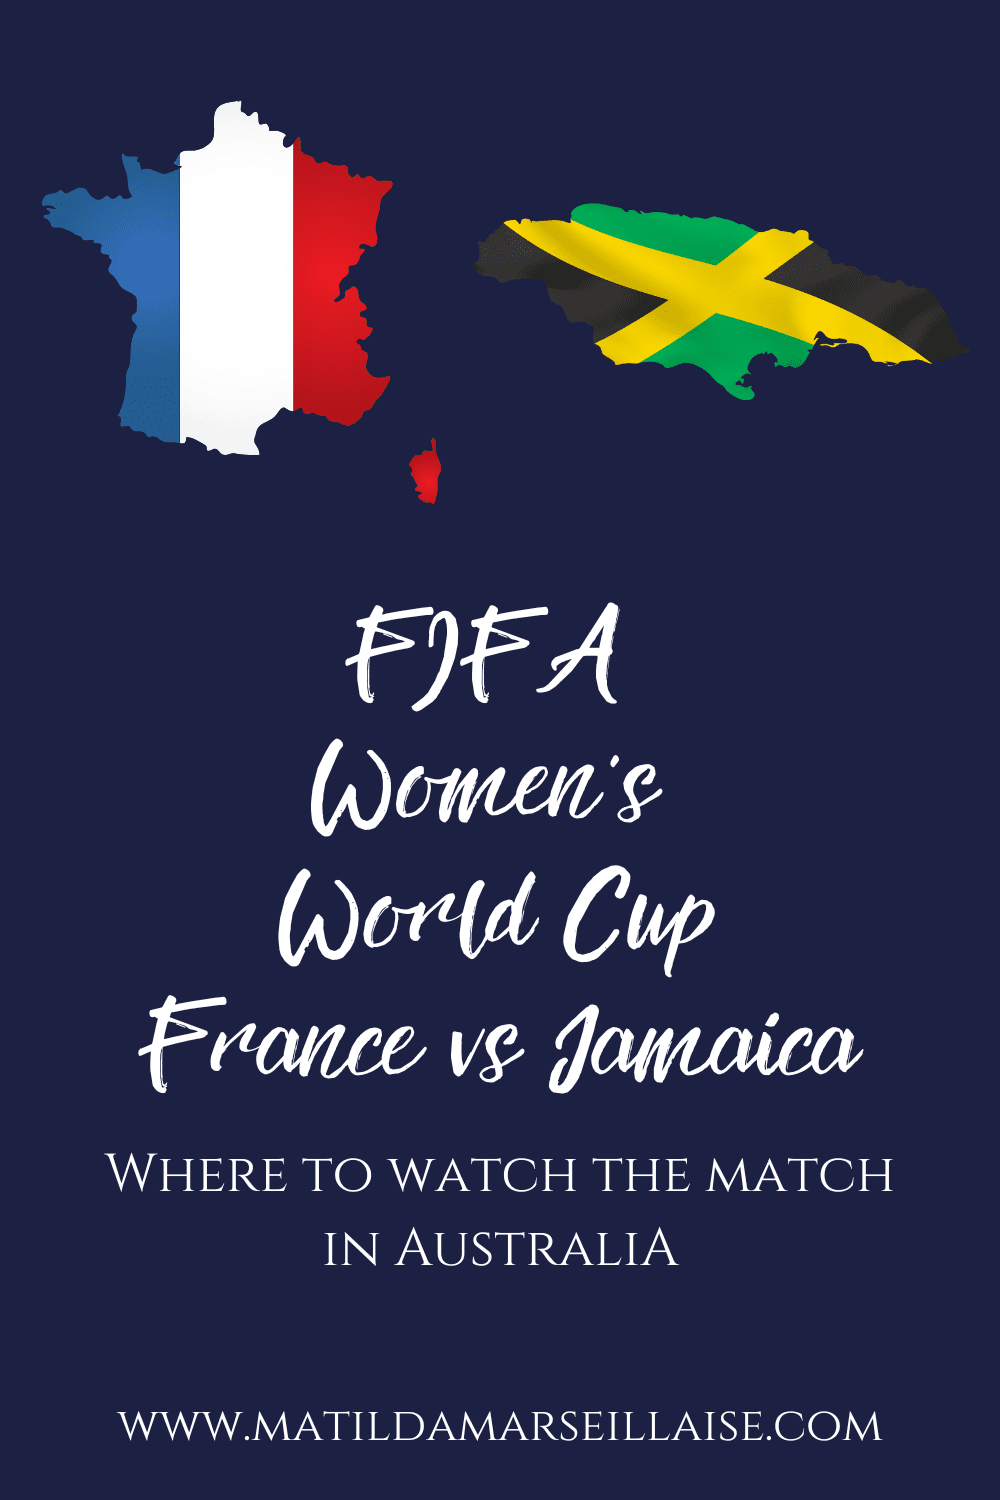 Where to watch FIFA Women’s World Cup France vs Jamaica in Australia on Sunday